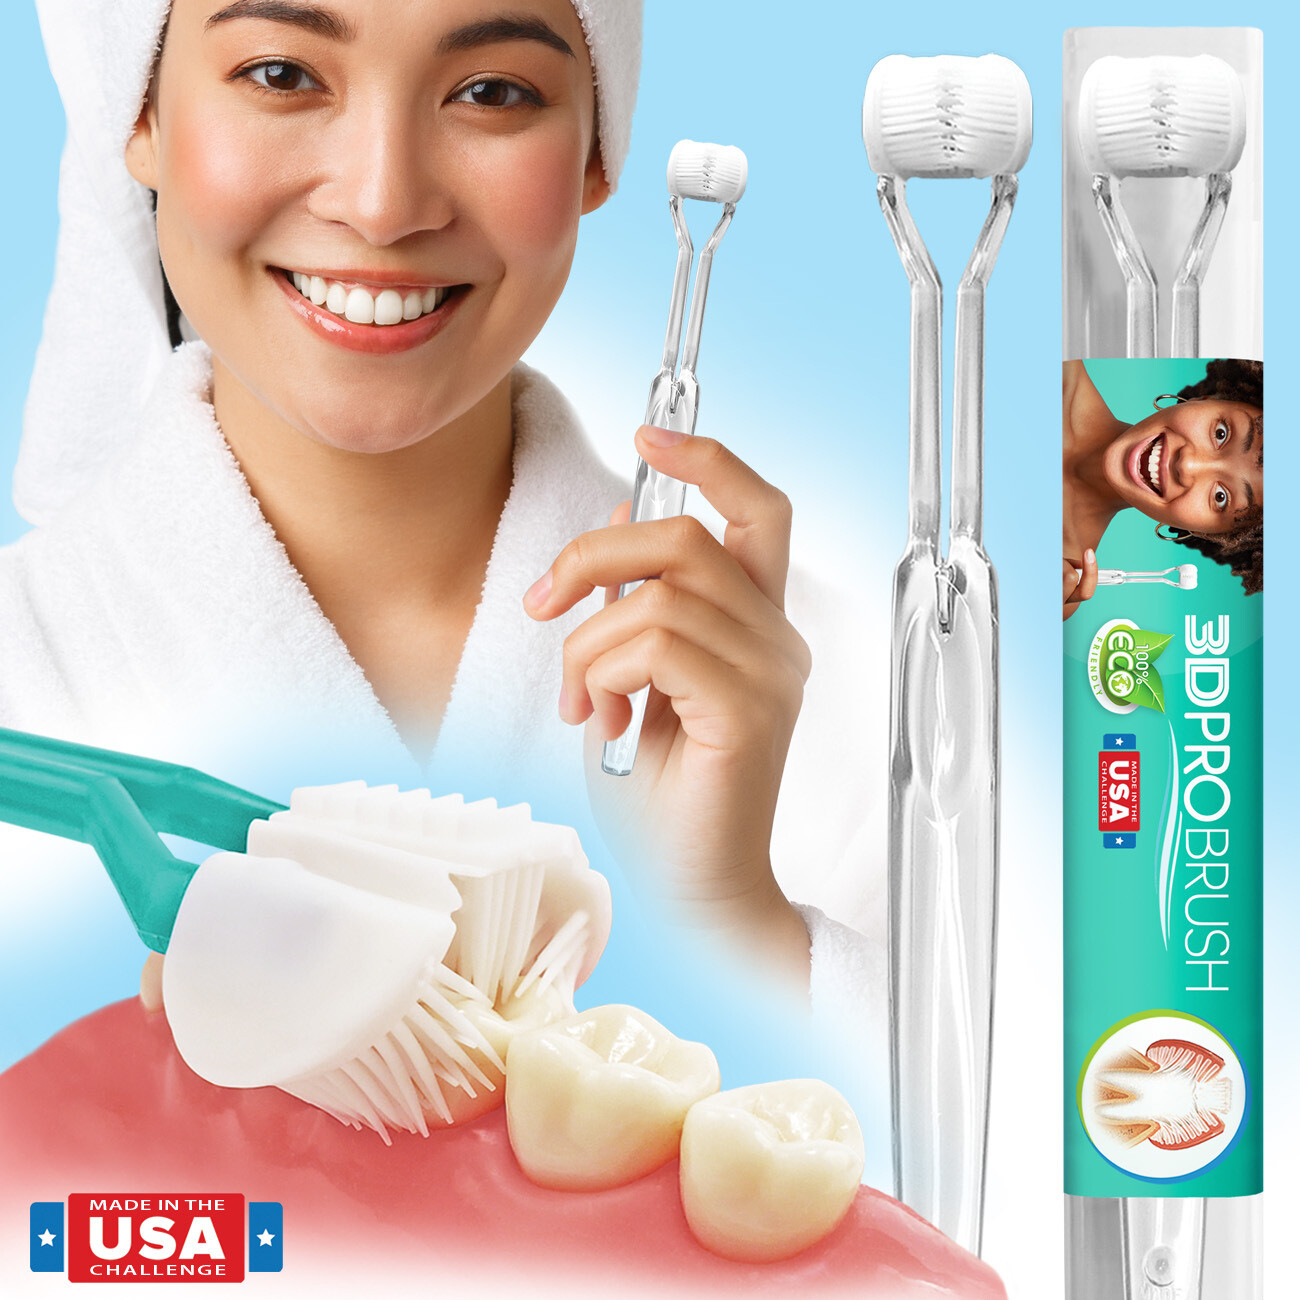 3D PRO BRUSH 3-Sided Toothbrush | Eco-Friendly | Made in the USA